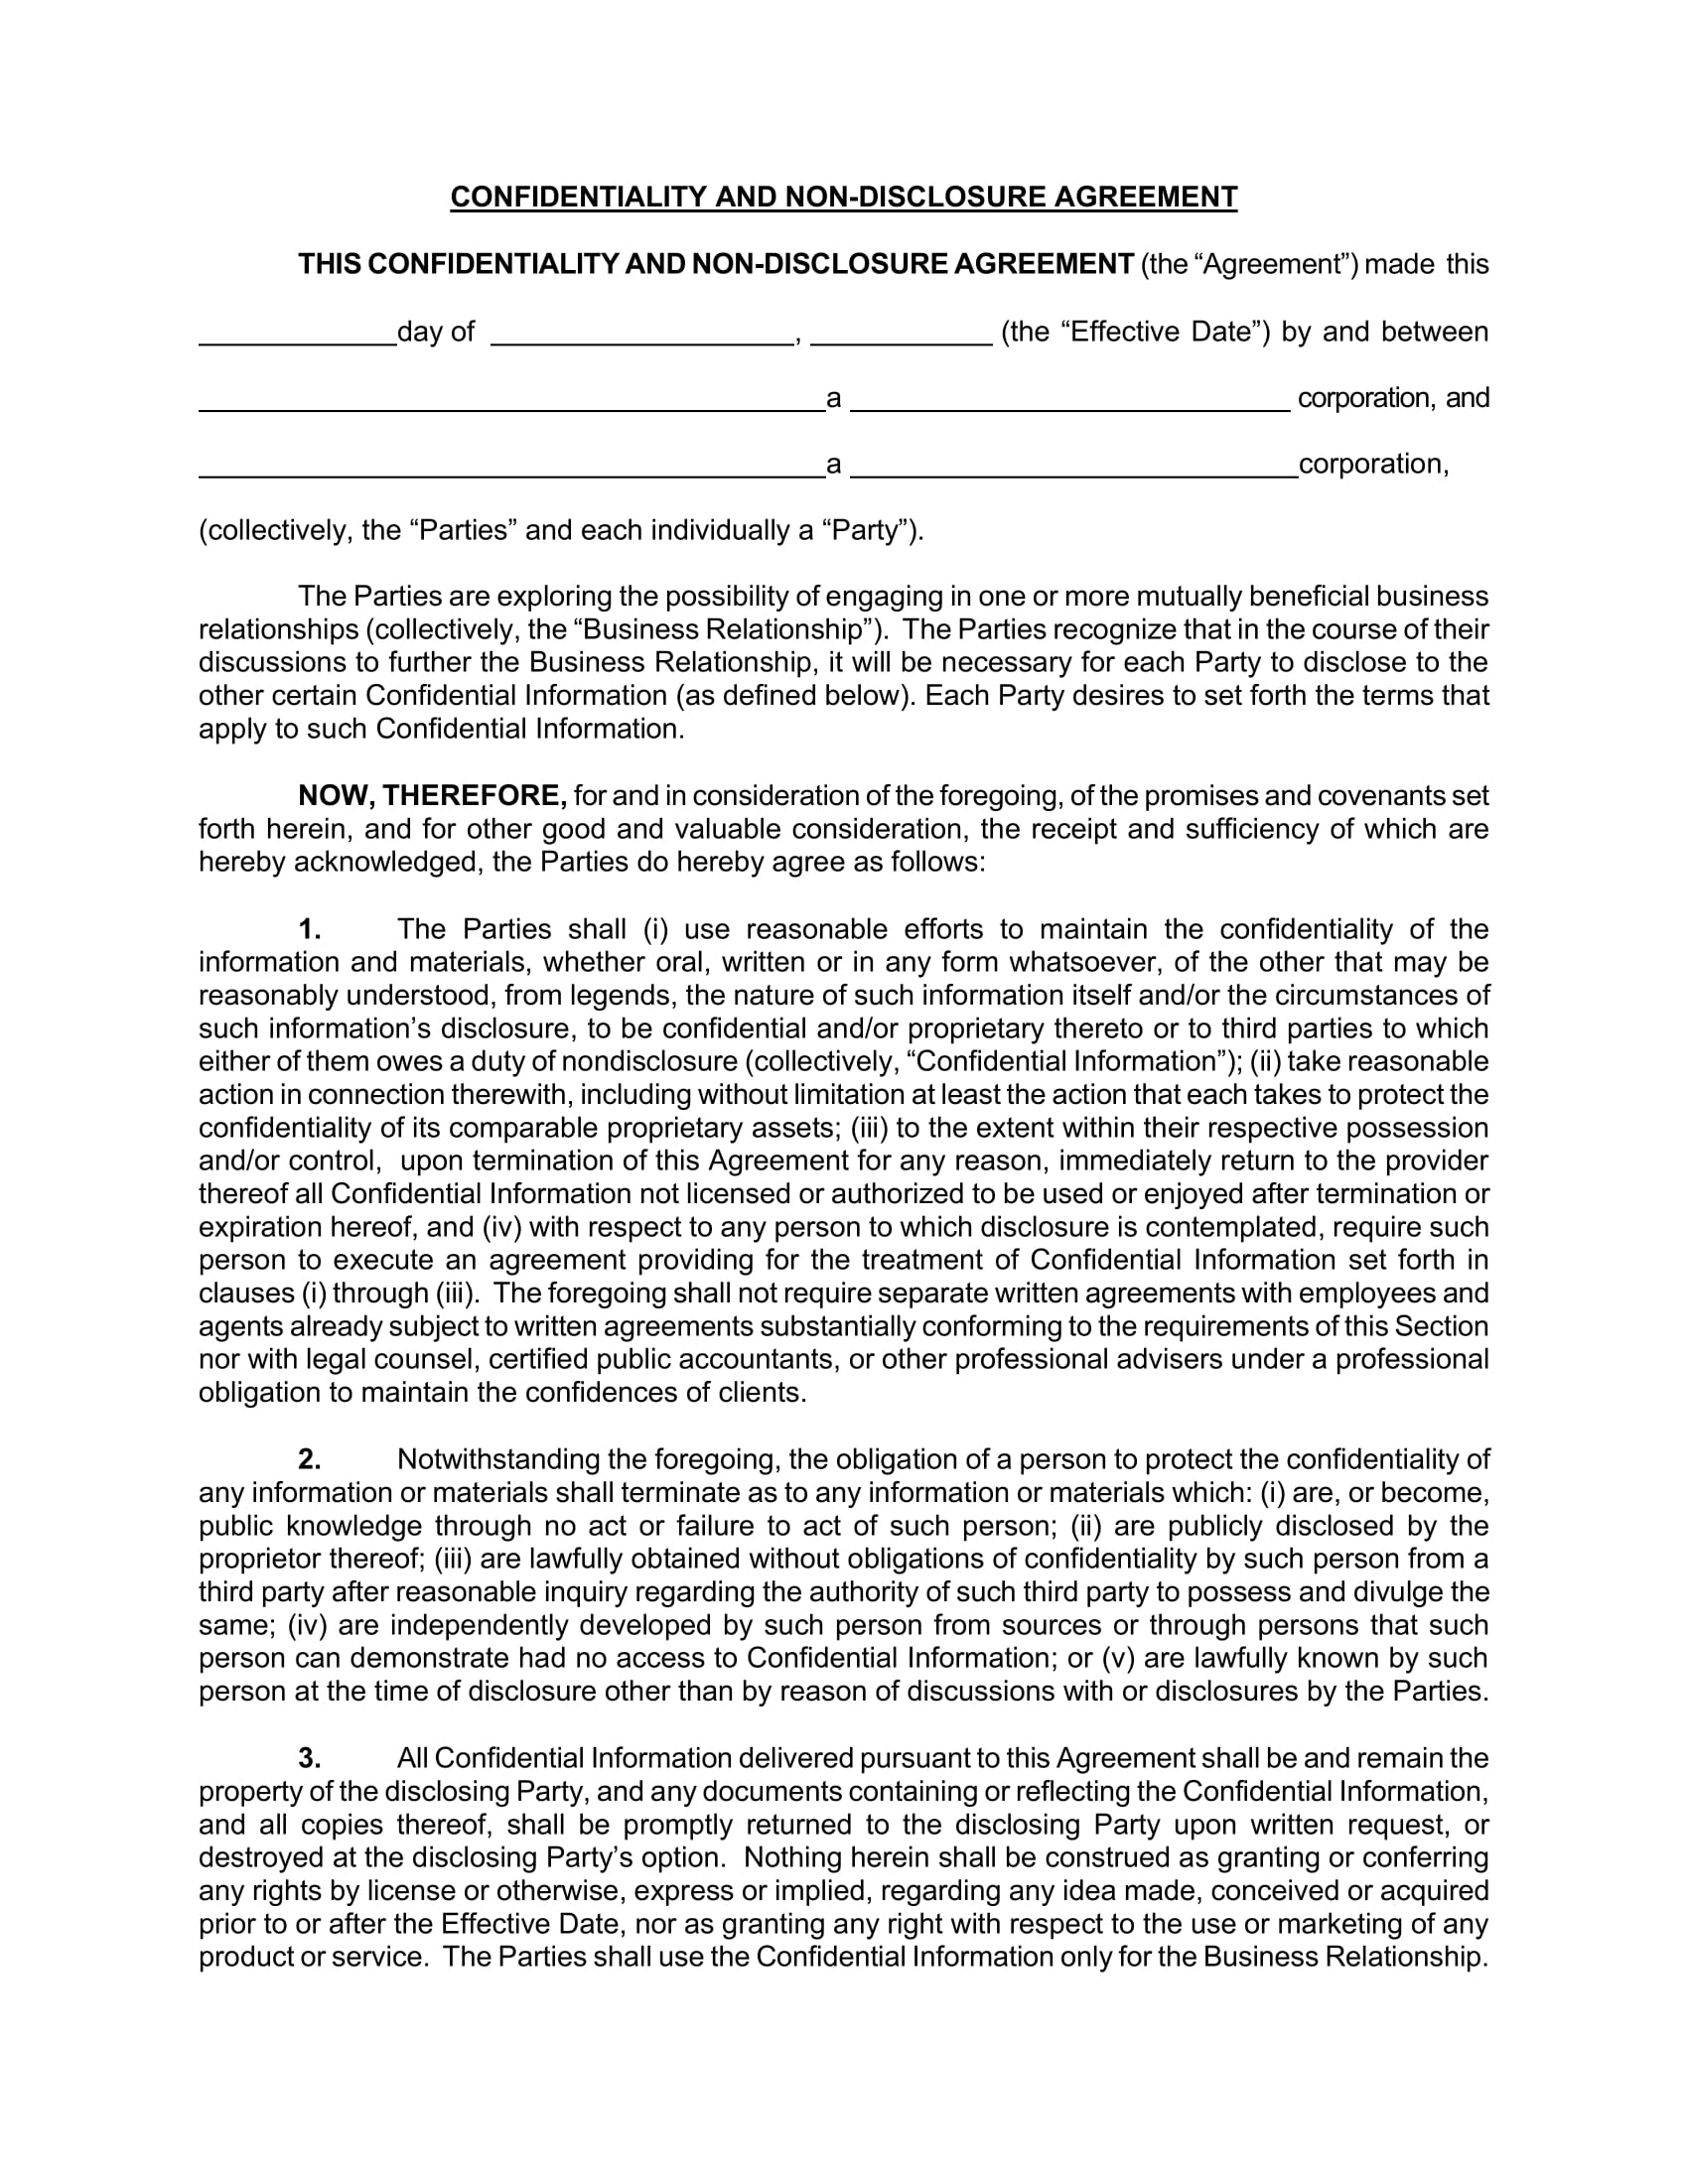 confidentiality and non disclosure agreement example 1